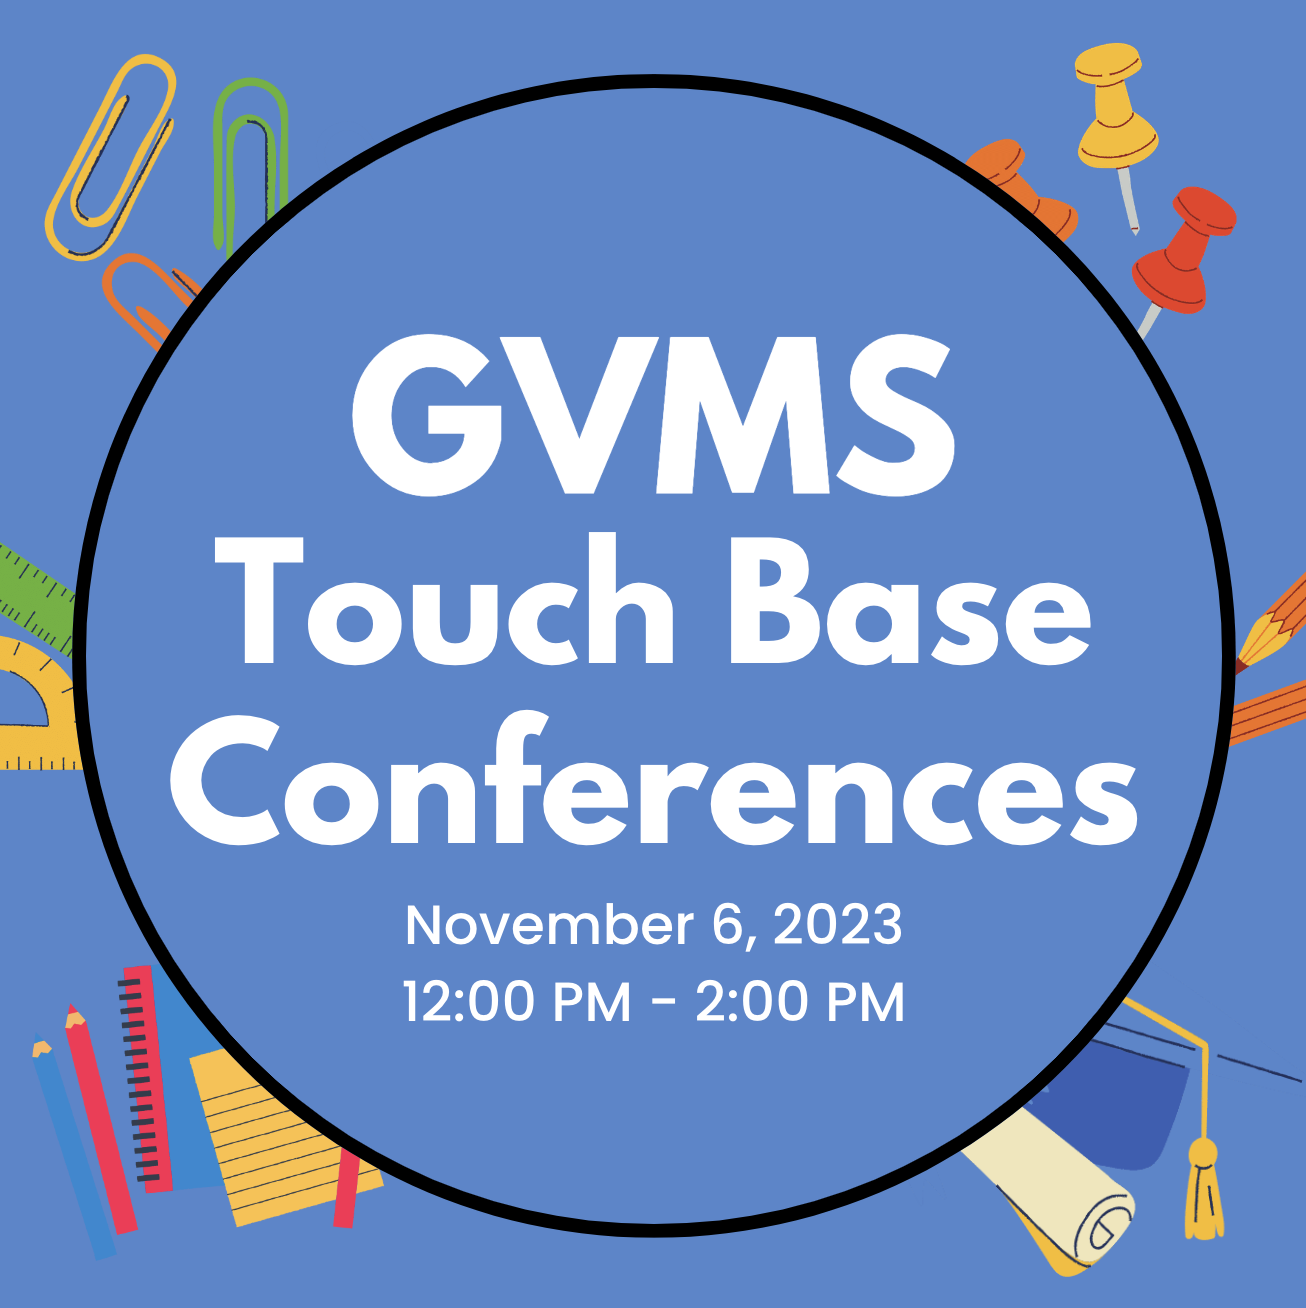 GVMS Touch Base Conferences